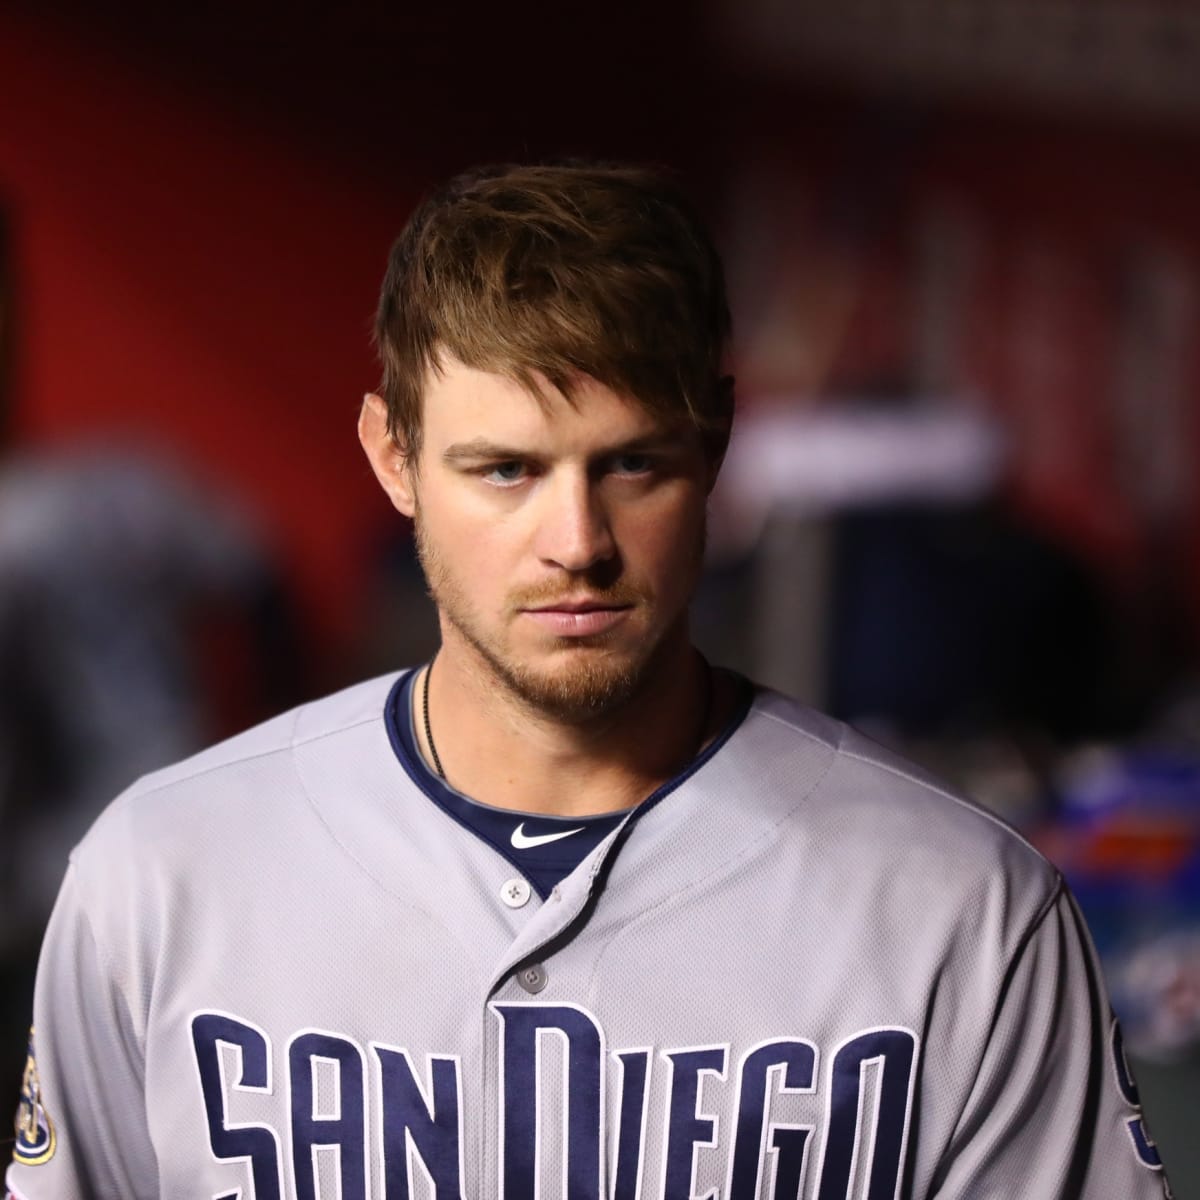 Report: Wil Myers, all-star for the San Diego Padres, sued for